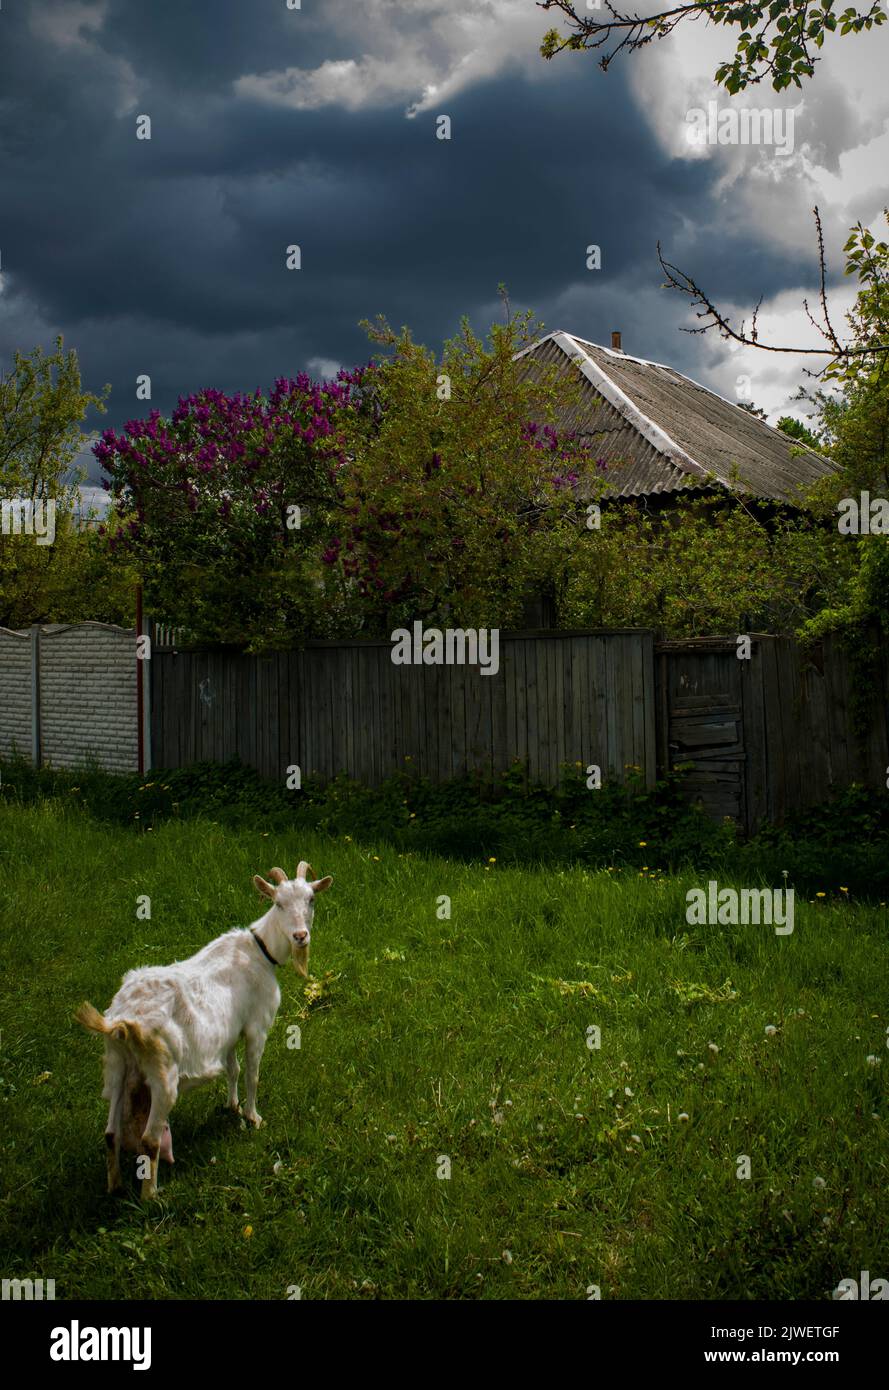 A goat, grazing near blooming lilac Stock Photo